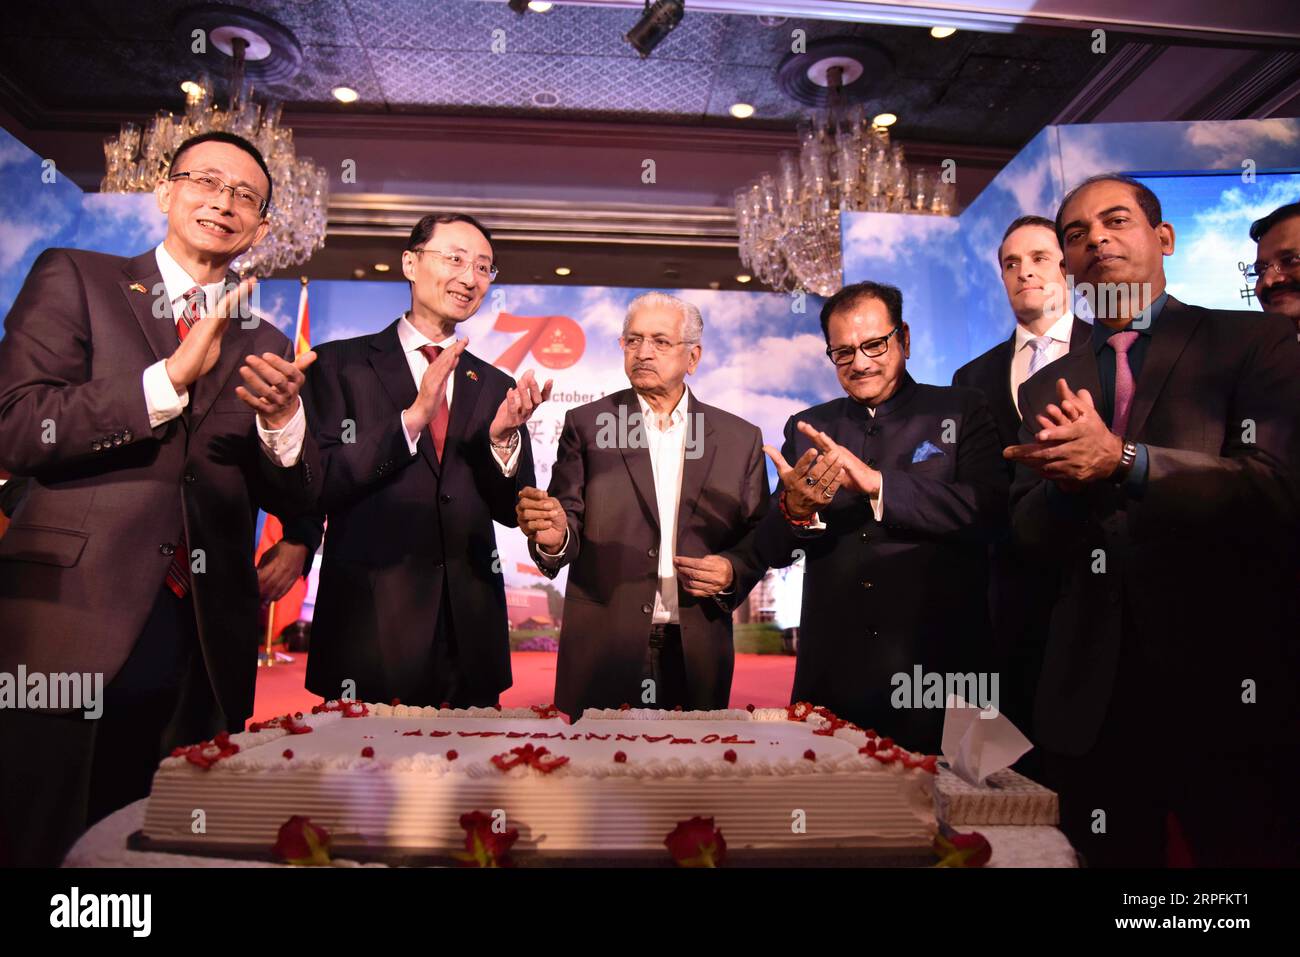 190926 -- MUMBAI, Sept. 26, 2019 Xinhua -- Chinese Ambassador to India Sun Weidong attends a reception to celebrate the 70th anniversary of the founding of the People s Republic of China in Mumbai, India, Sept. 22, 2019. Over 400 Indian and Chinese people from various walks of life attended a grand reception marking the 70th anniversary of the founding of the People s Republic of China held in India s financial capital Mumbai on Sunday evening. Photo by Fariha Farooqui/Xinhua INDIA-MUMBAI-CHINA-70TH ANNIVERSARY-RECEPTION PUBLICATIONxNOTxINxCHN Stock Photo